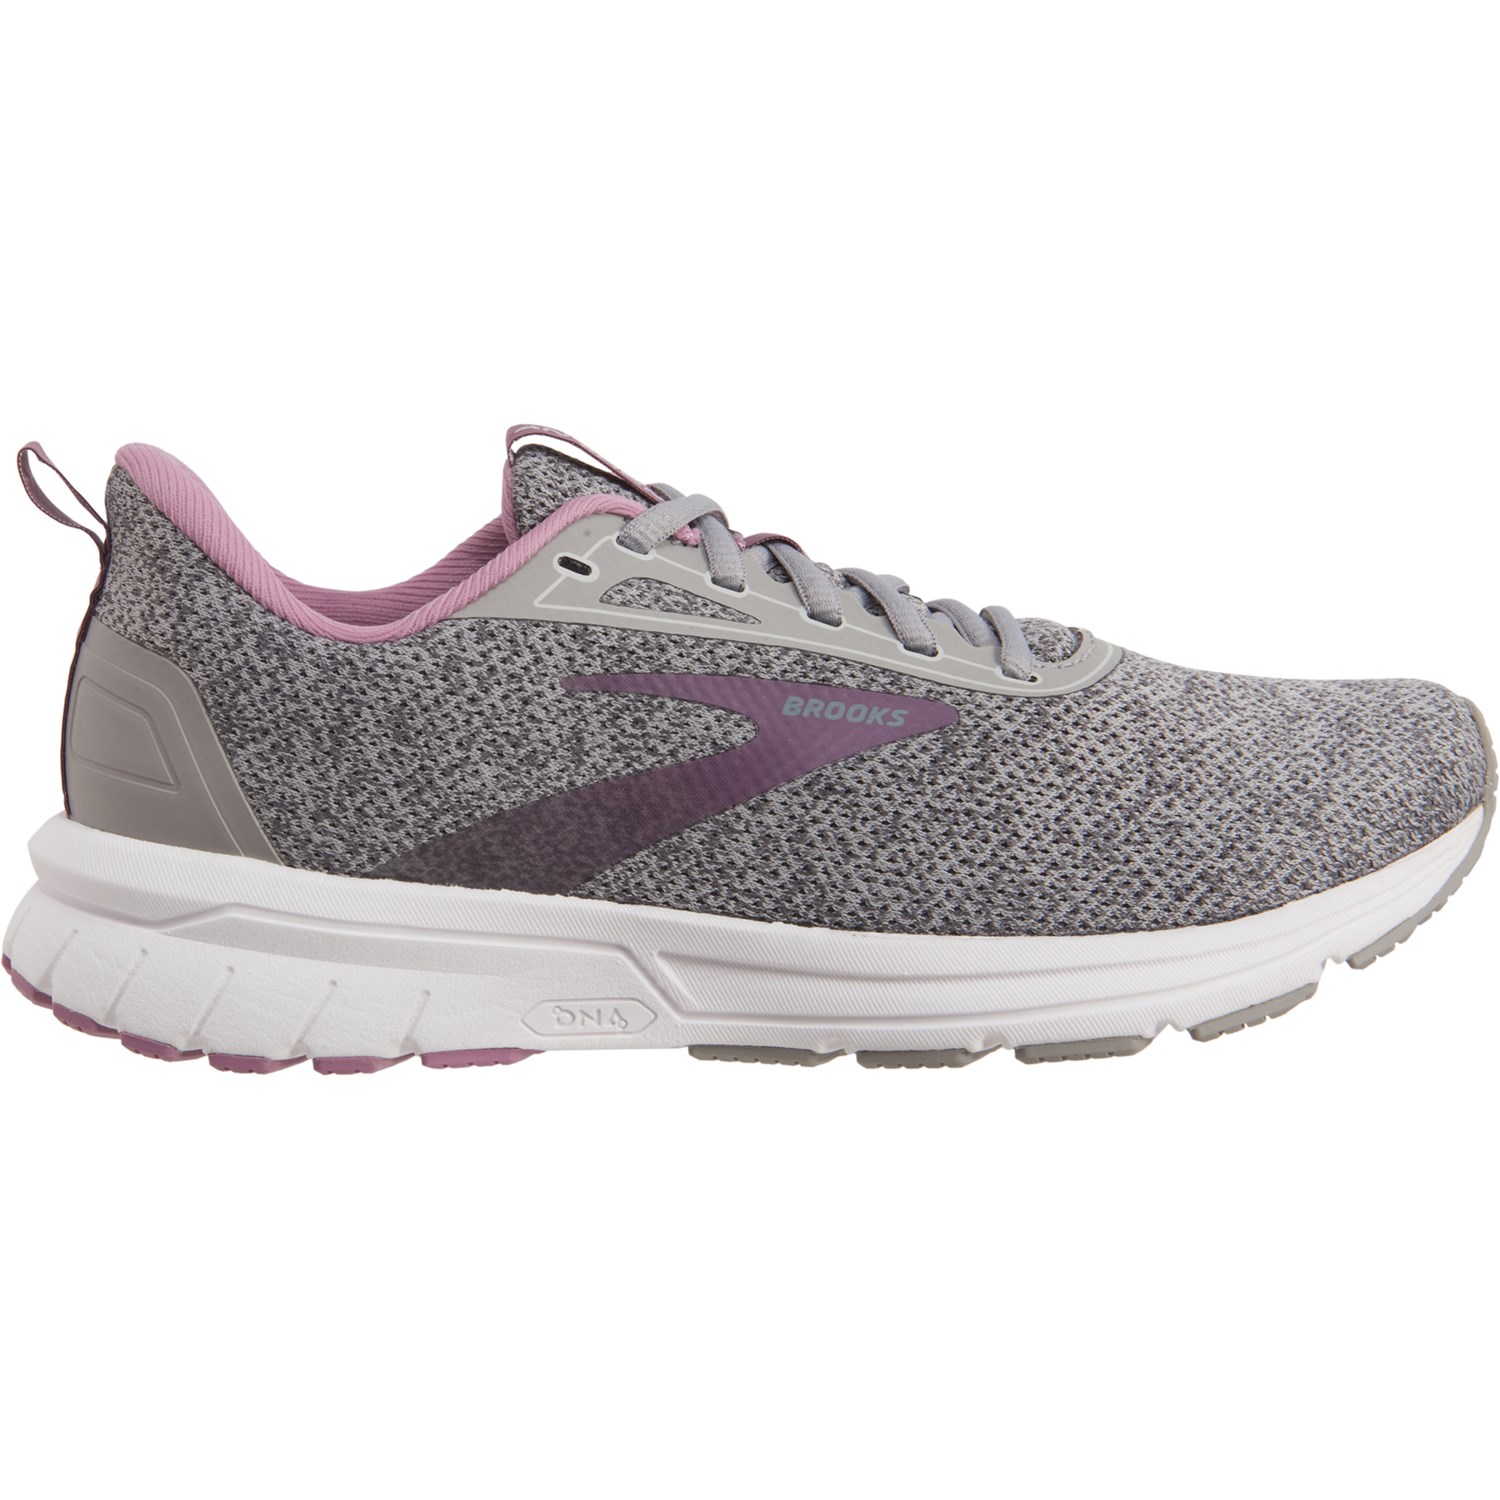 Brooks Anthem 2 Running Shoes (For Women)